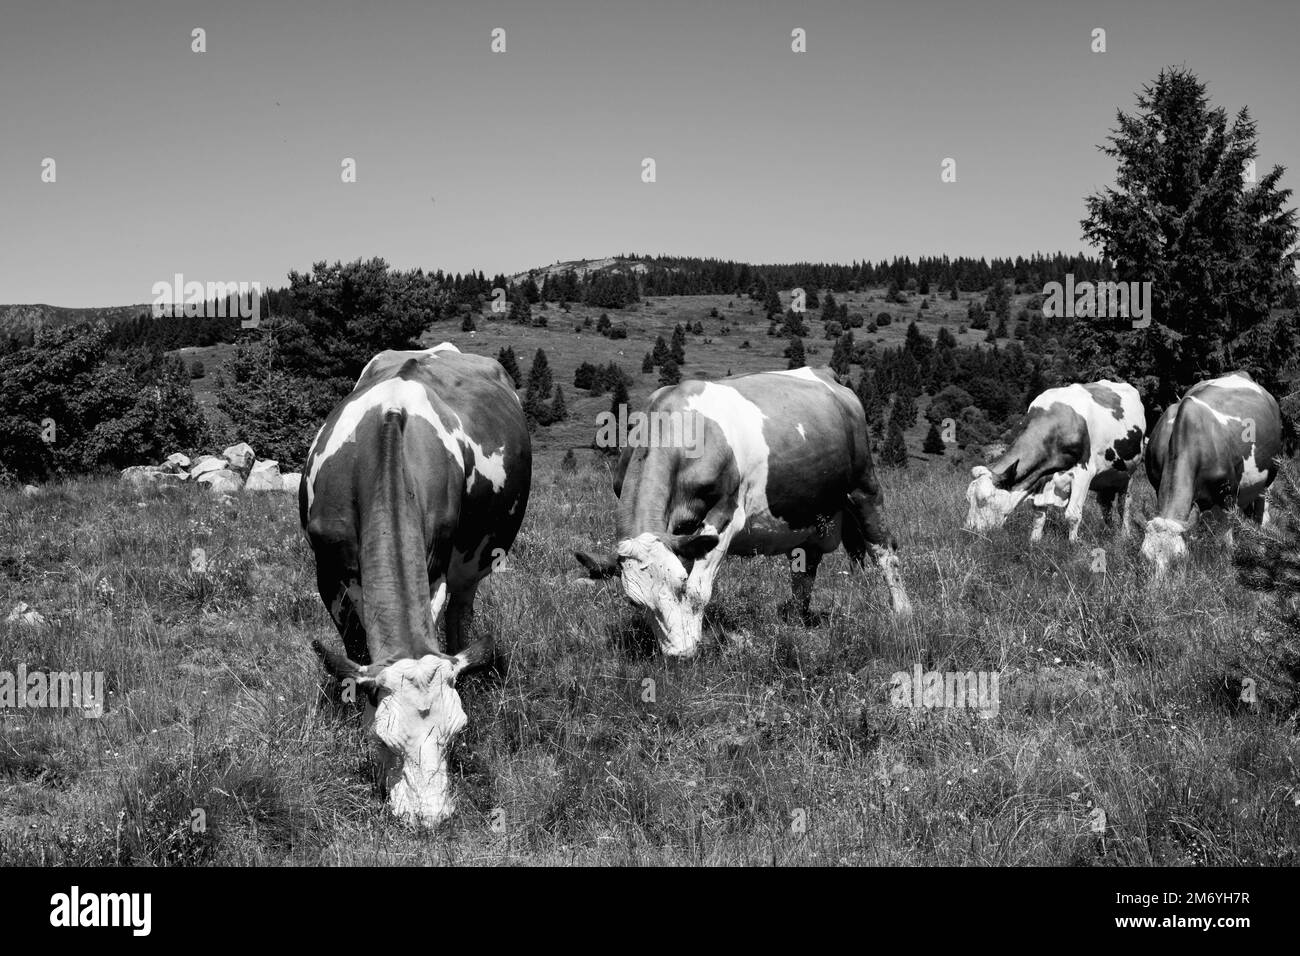 Milk cow. White and brown colored cows. Mountain cows. Cows sunbathing Stock Photo